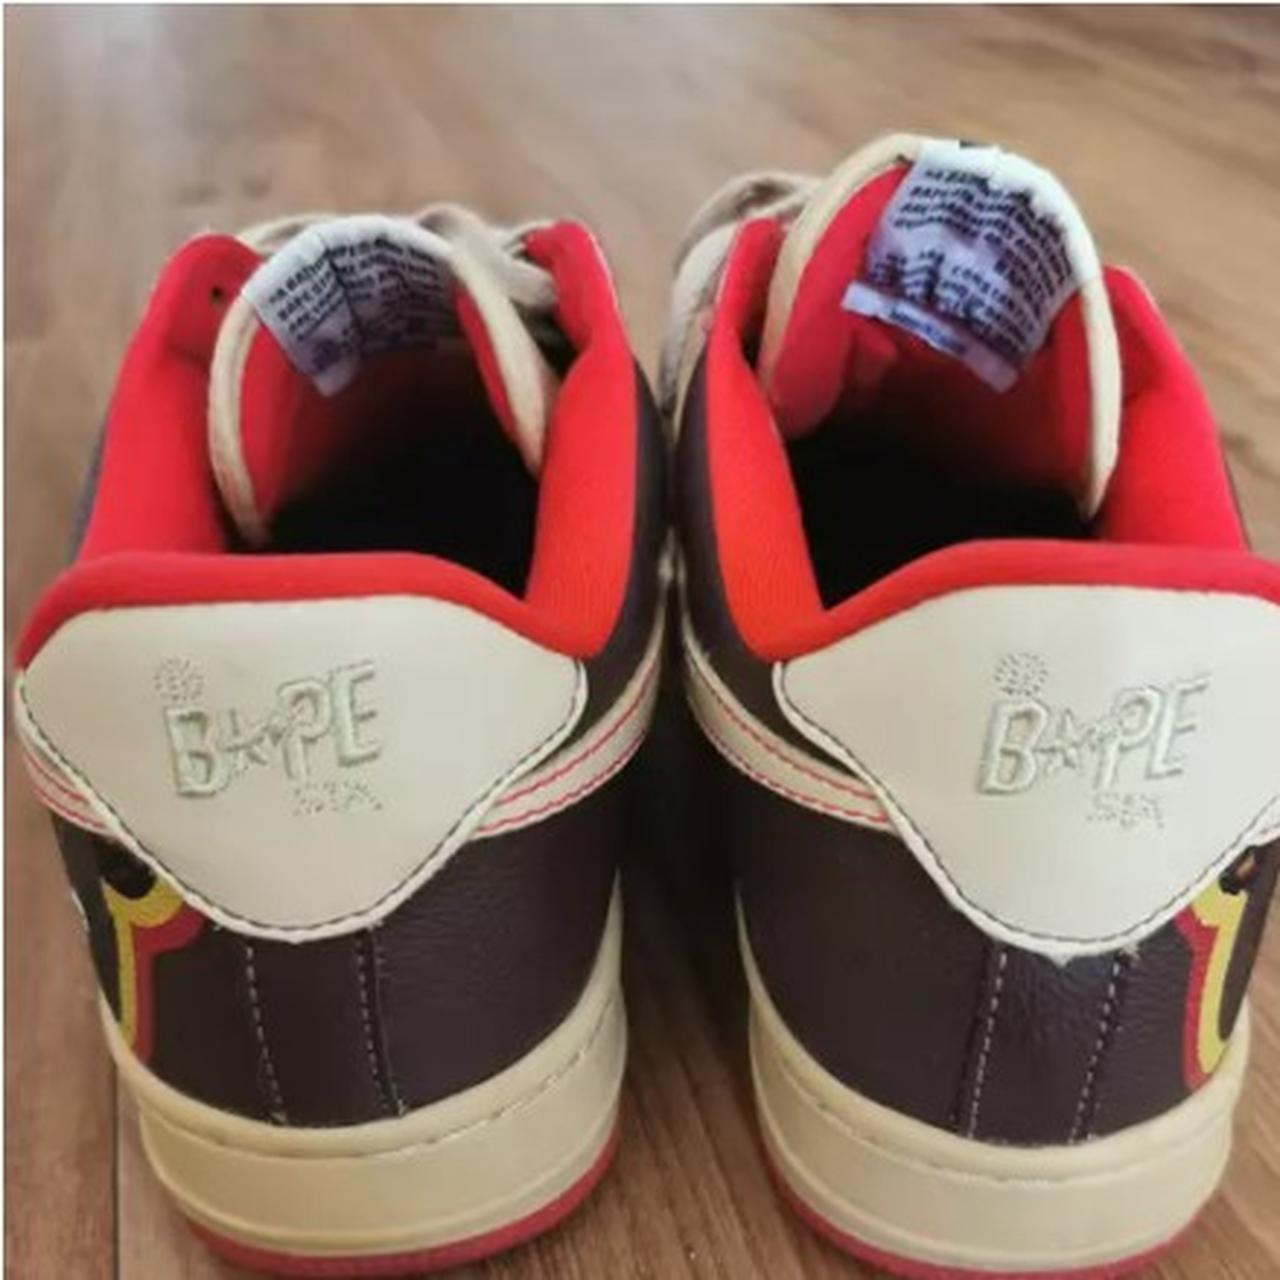 Selling these very rare bapestas x kanye west... - Depop